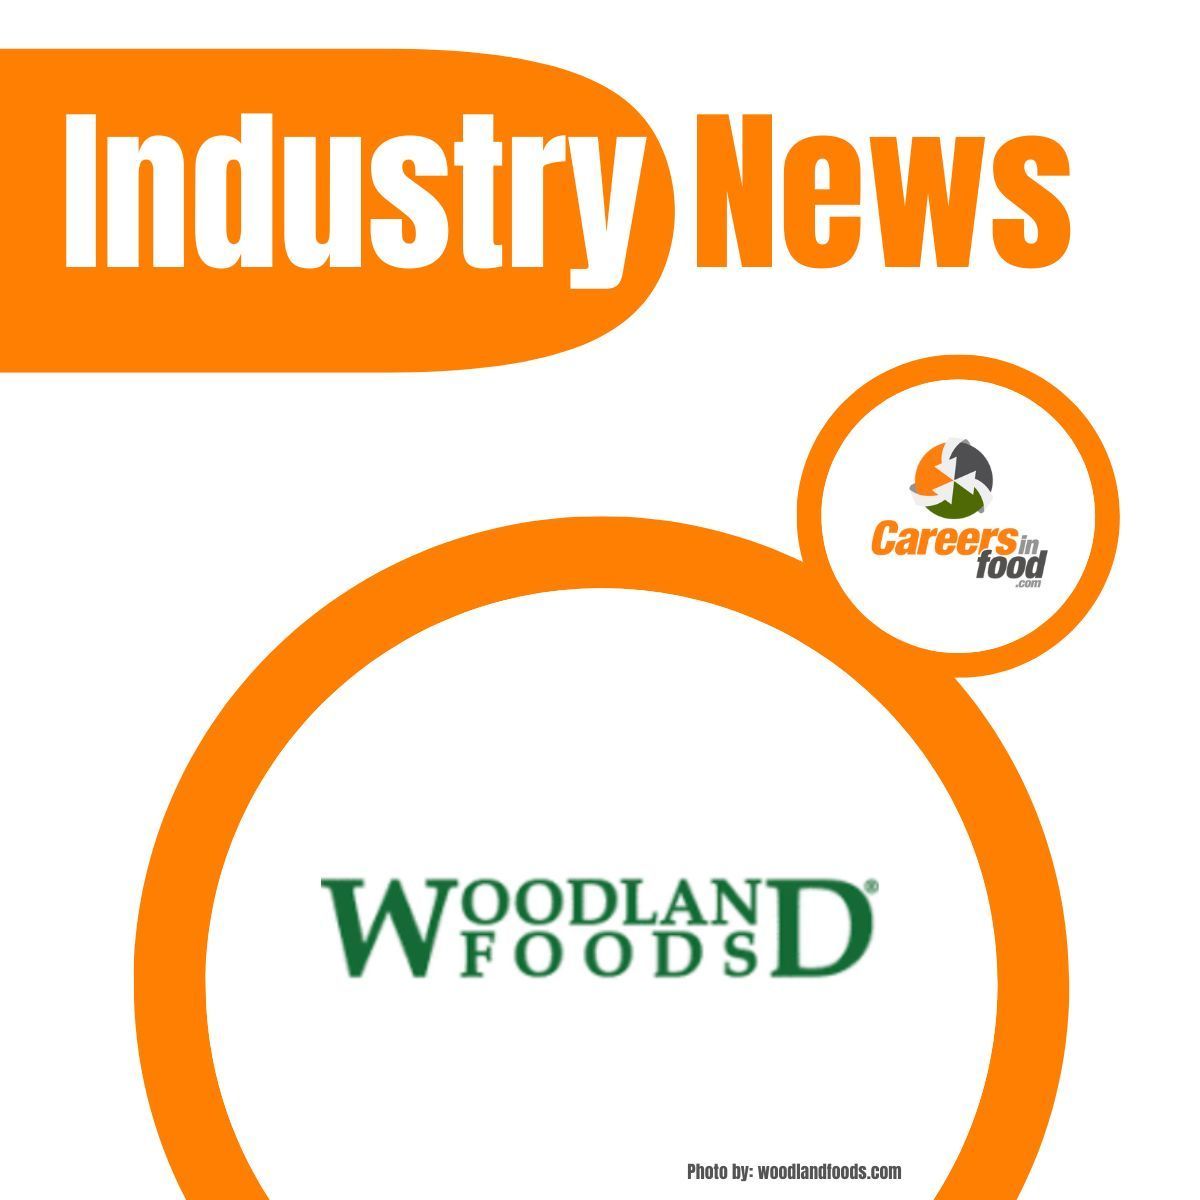 Woodland Foods Acquires Idan Foods!

The acquisition is expected to enhance Woodland's manufacturing scale and footprint and deepen its market diversification.

More on this acquisition: careersinfood.com/career-plannin… 

#FoodNews #Acquisition #BusinessGrowth #FoodManufacturing